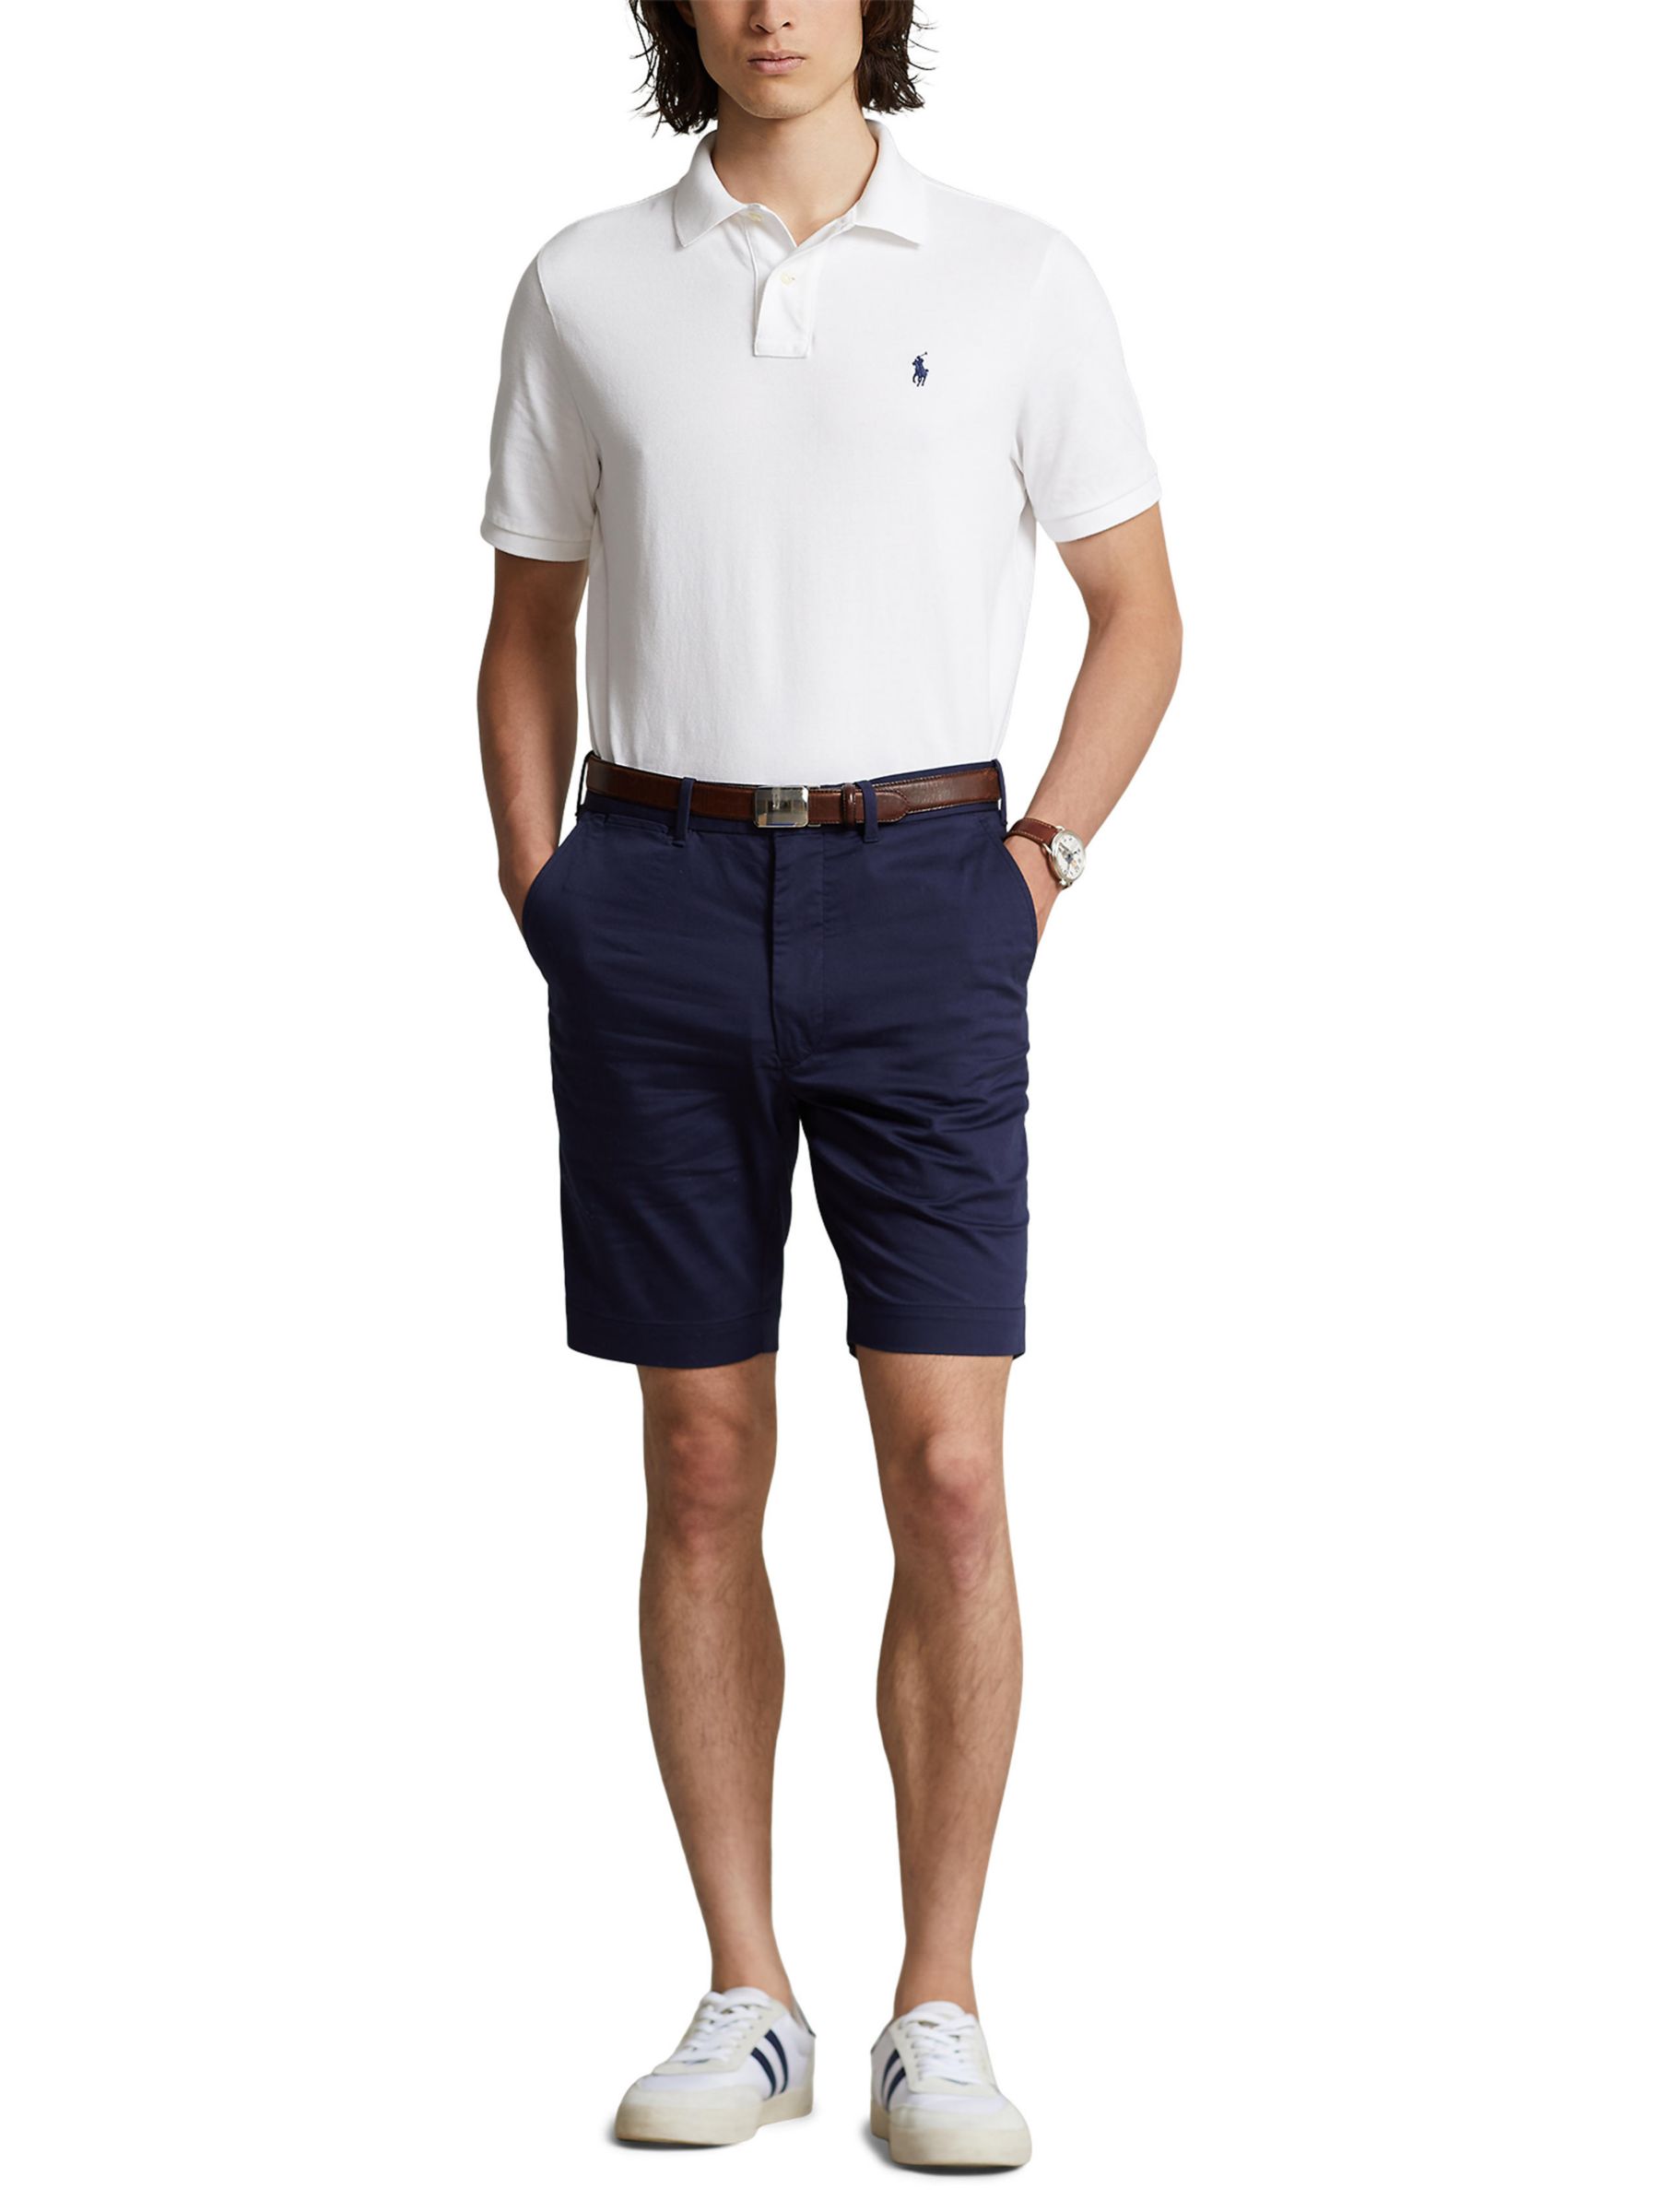 Polo Ralph Lauren Golf Shorts, French Navy at John Lewis & Partners